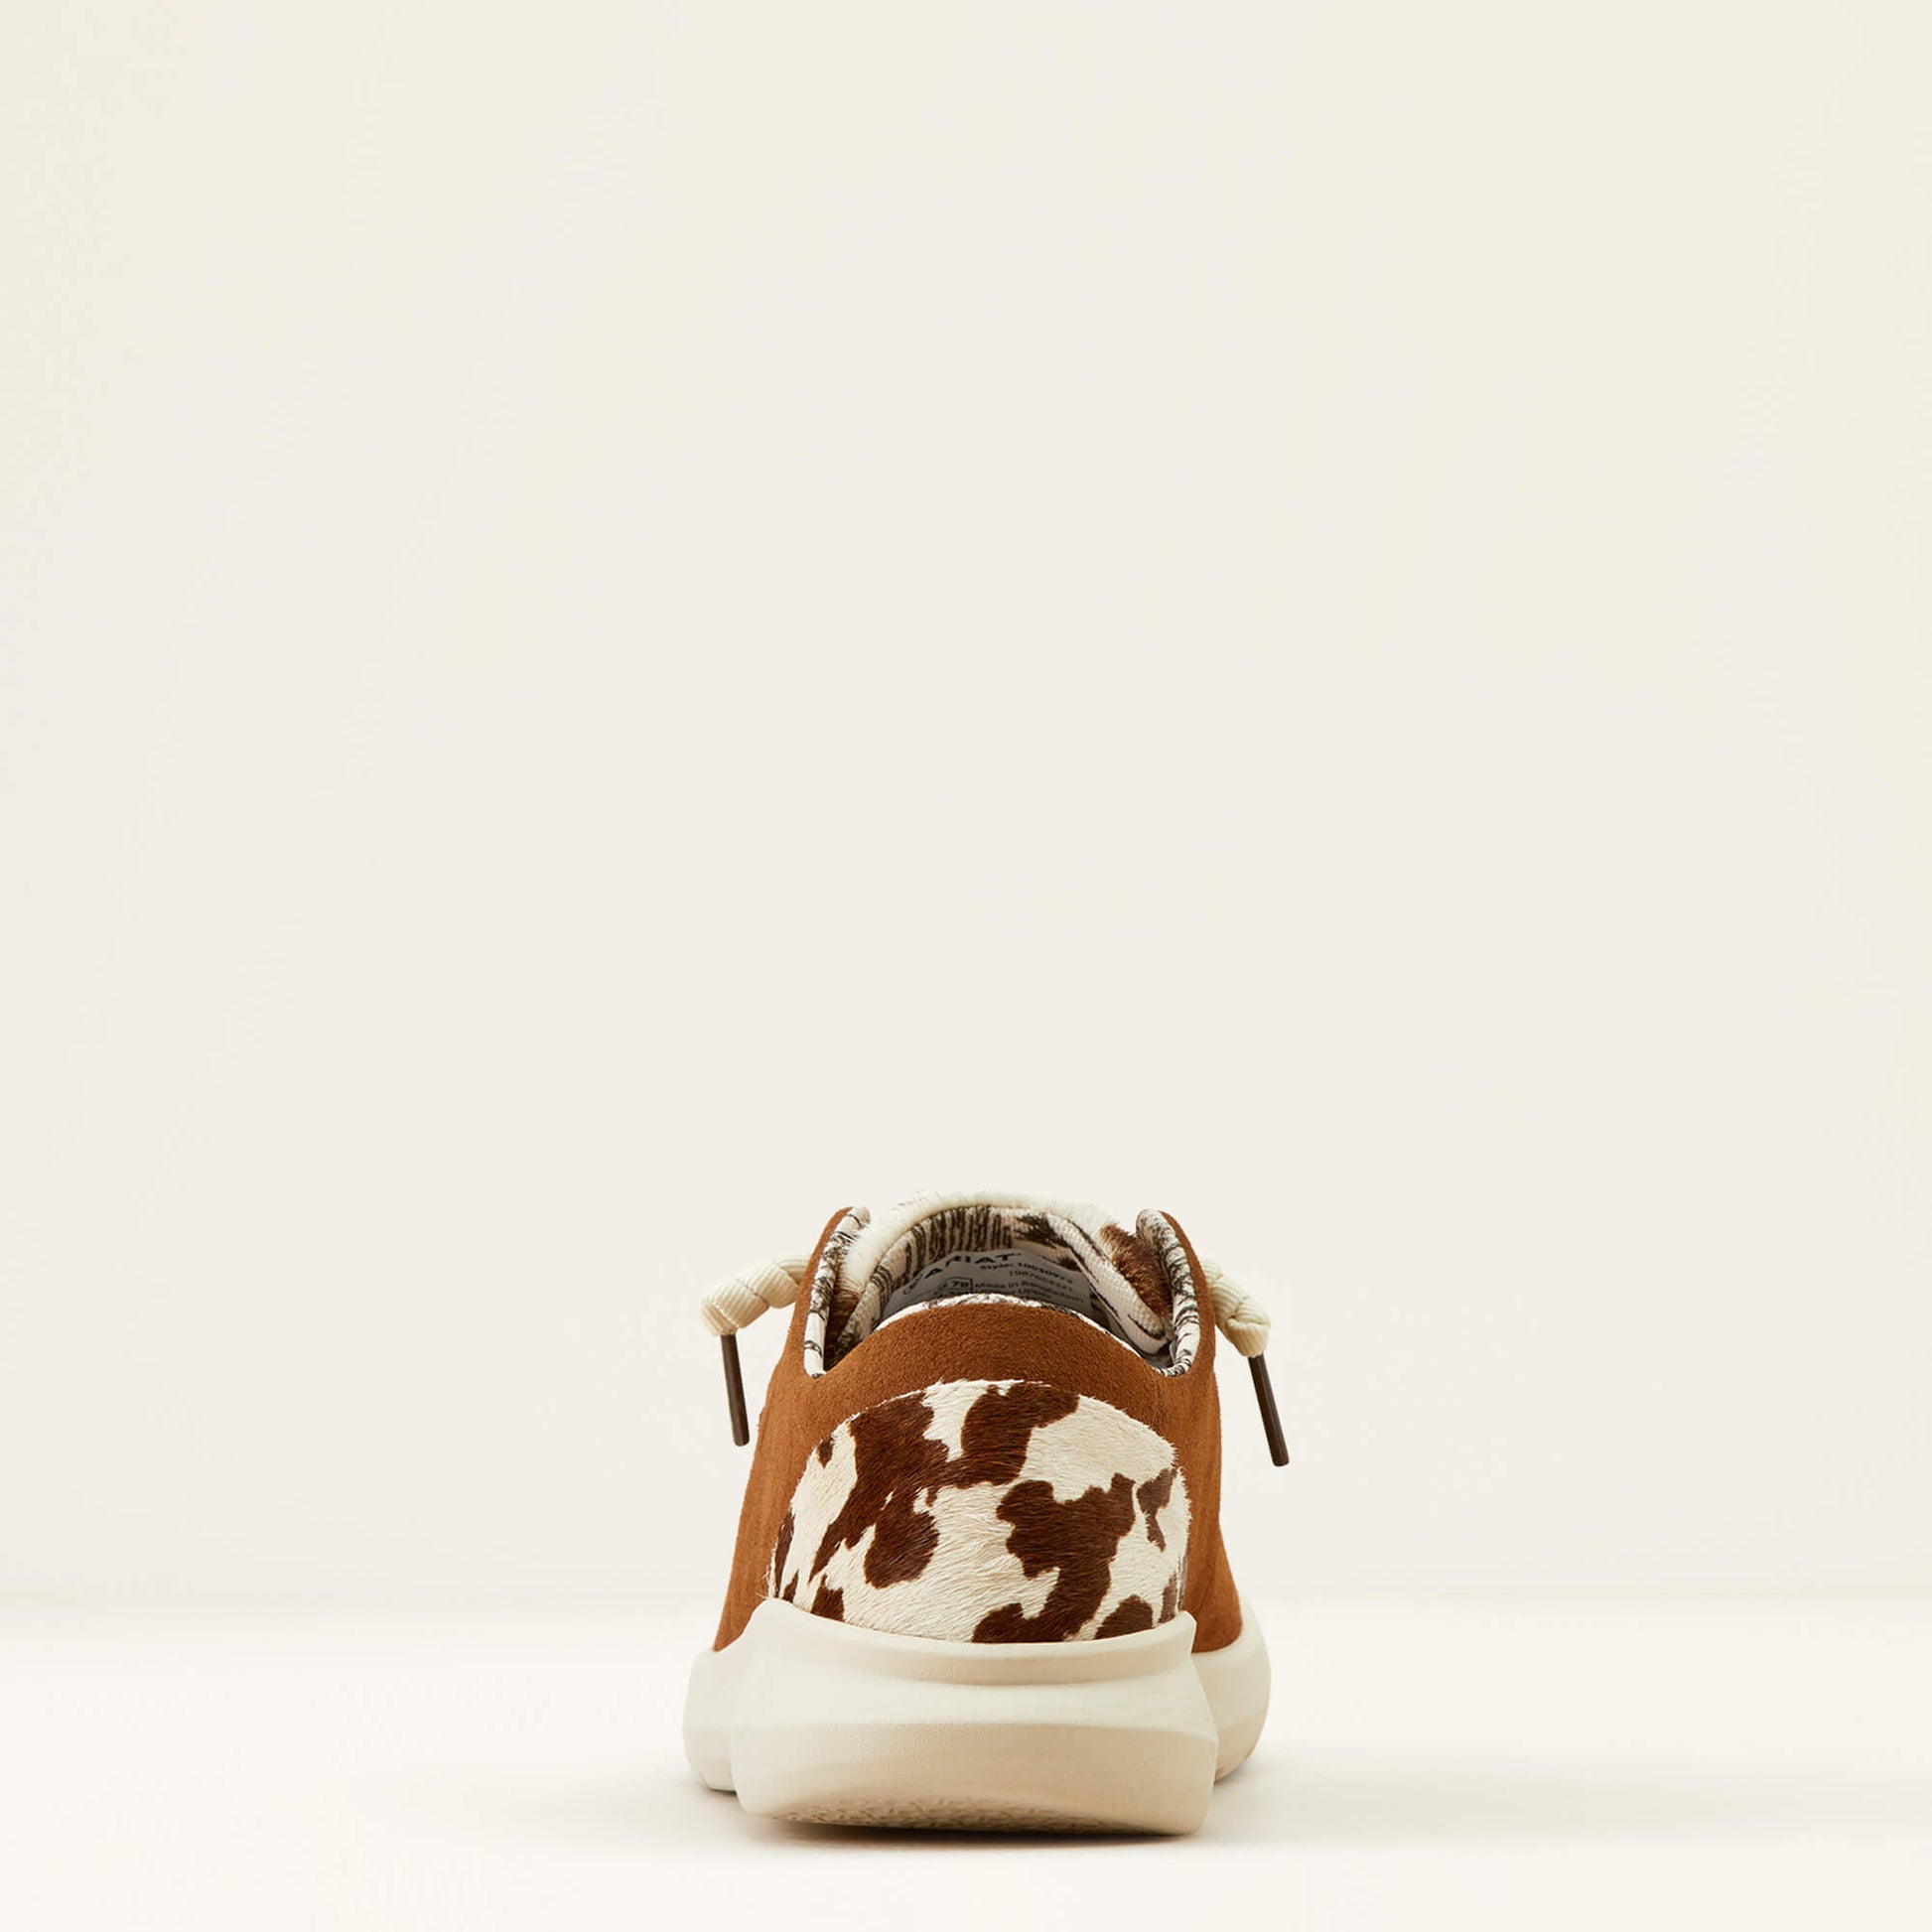 GINGER SUEDE|COW HAIR ON